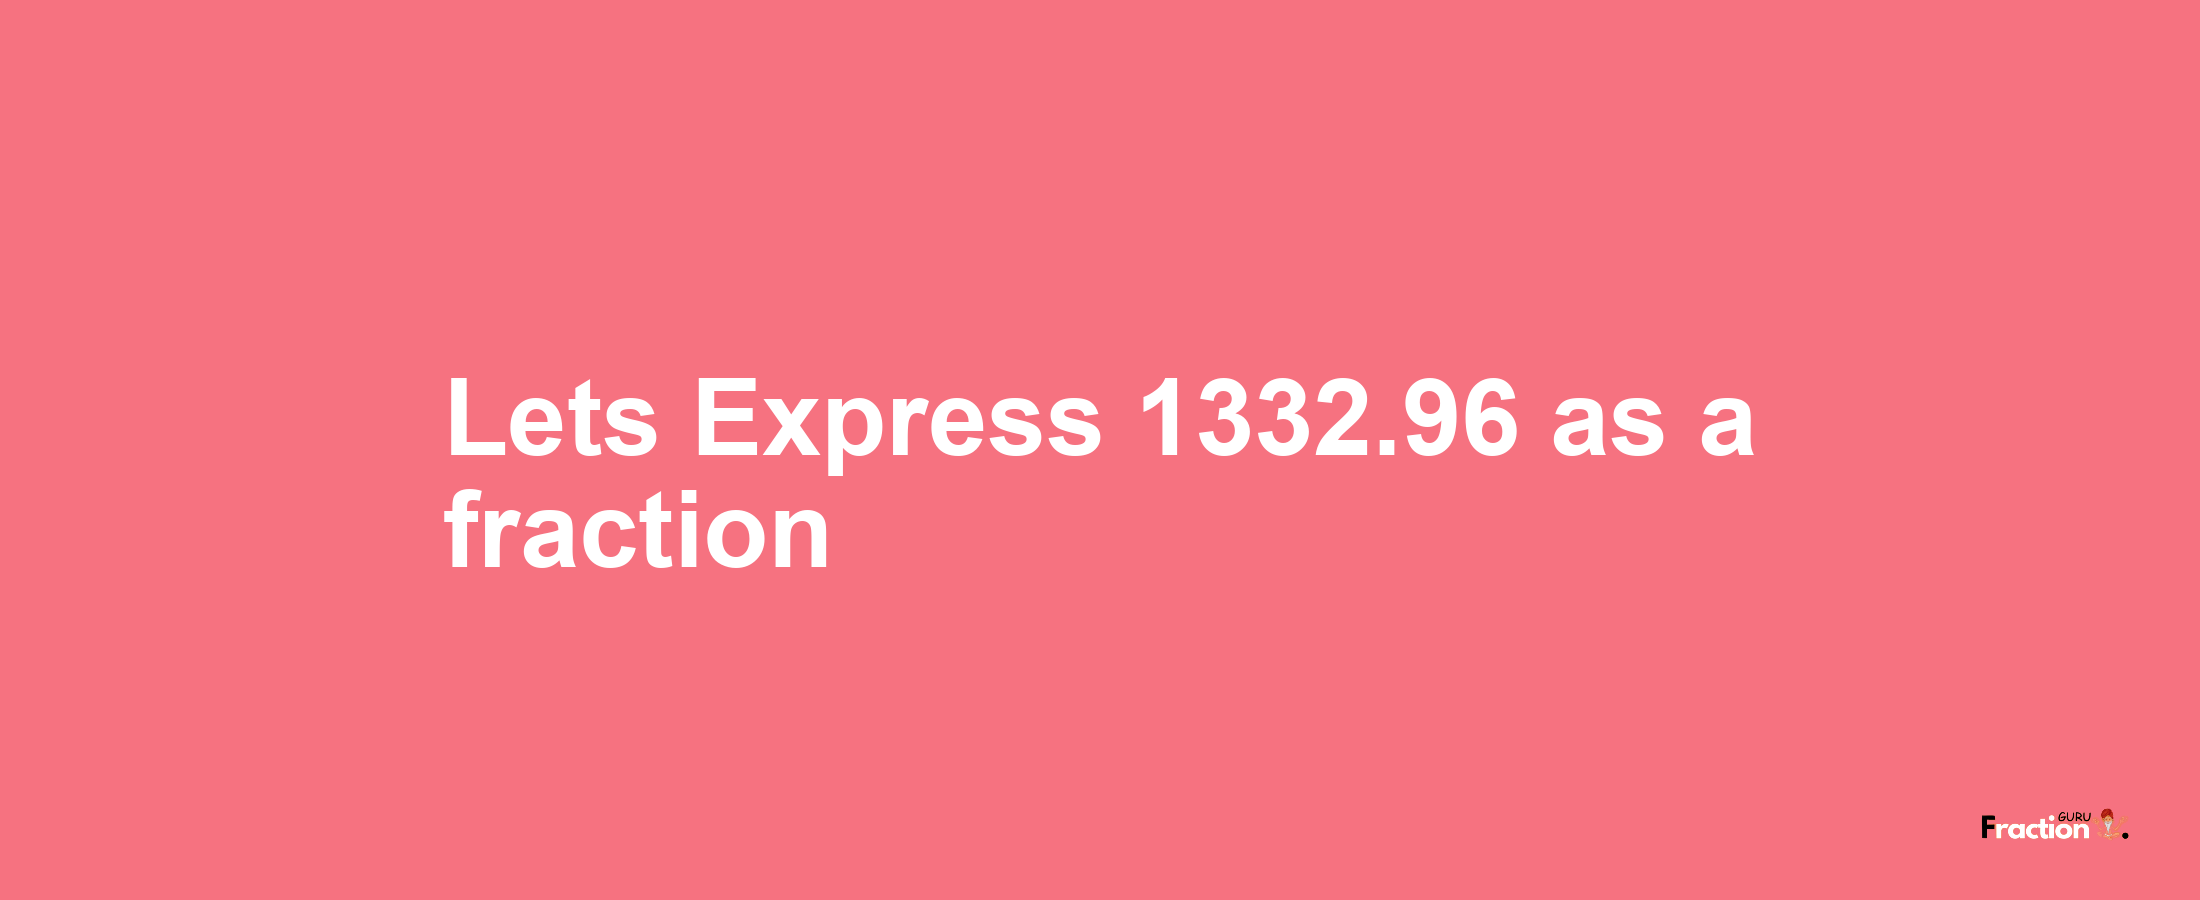 Lets Express 1332.96 as afraction